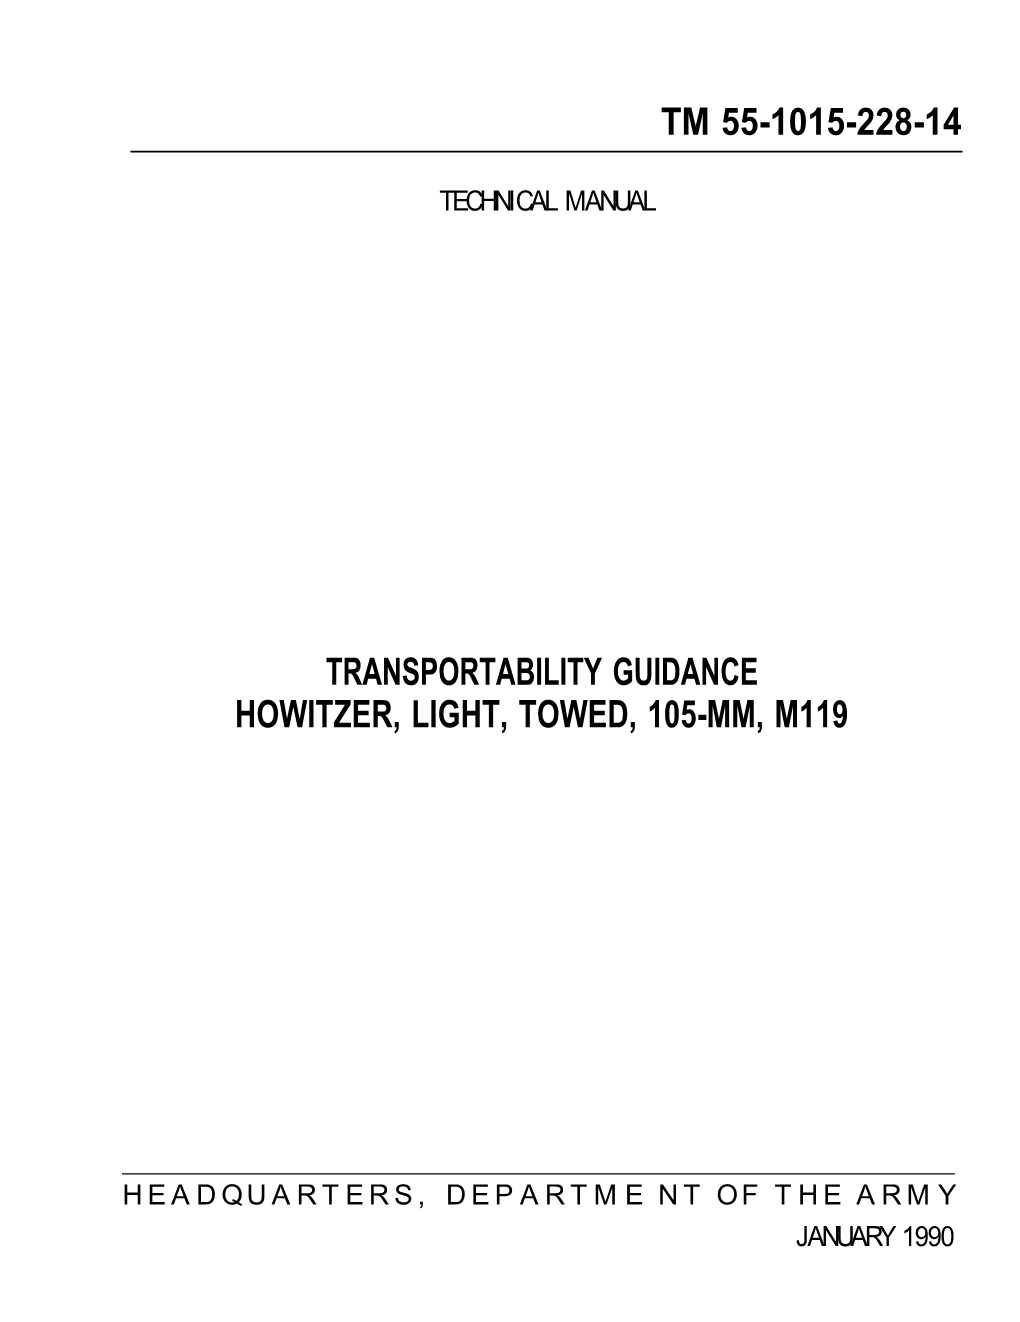 Tm 55-1015-228-14 Transportability Guidance Howitzer, Light, Towed, 105-Mm, M119